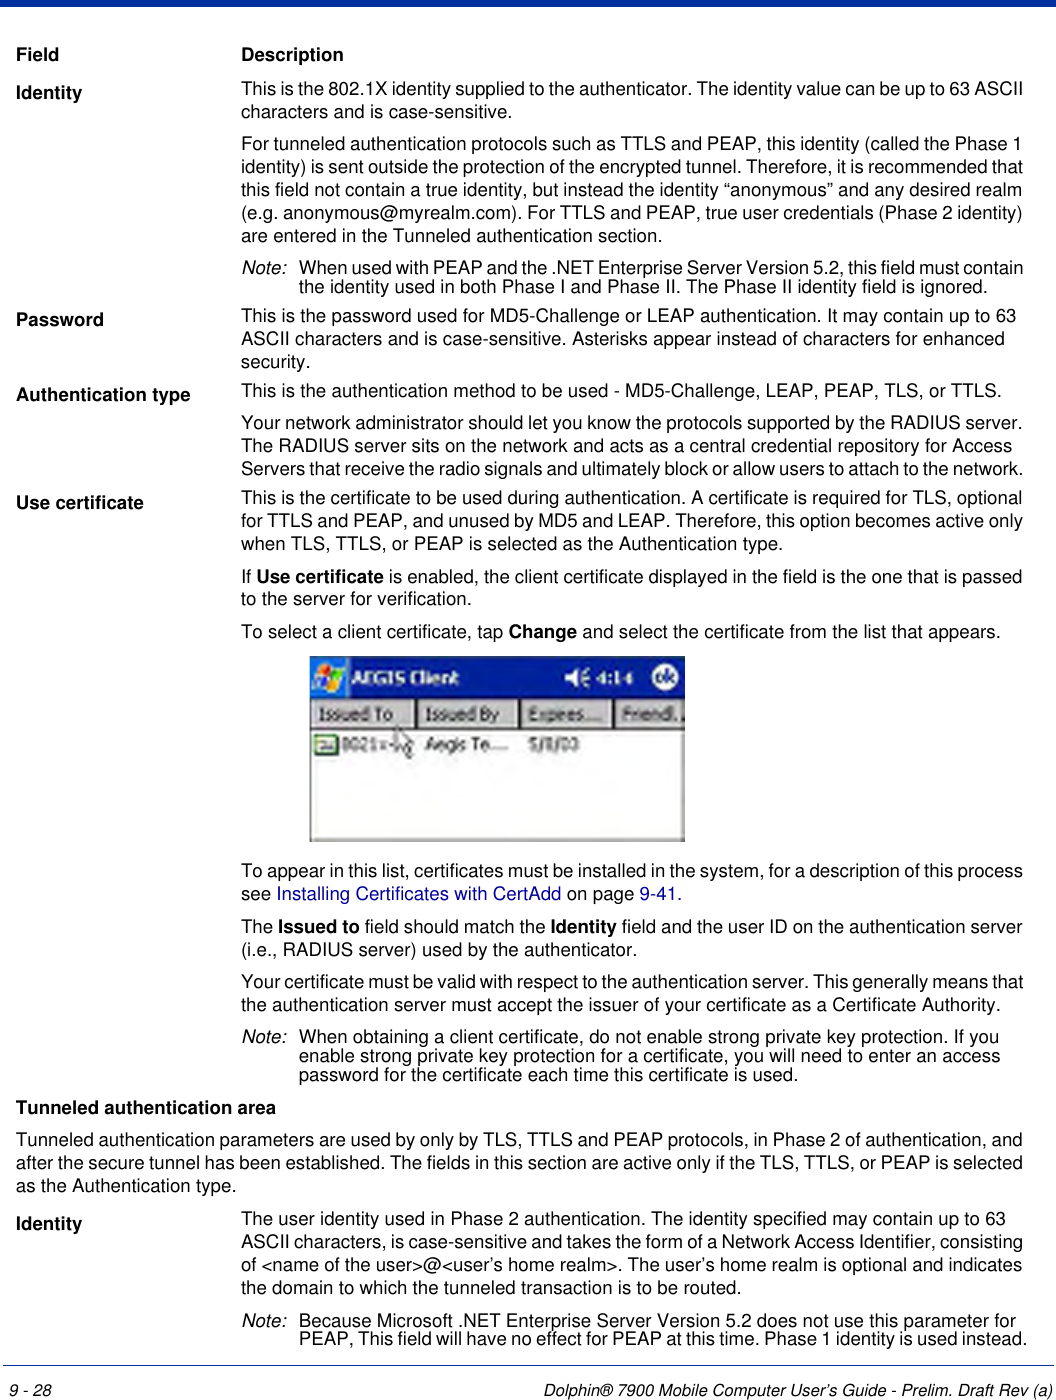 9 - 28 Dolphin® 7900 Mobile Computer User’s Guide - Prelim. Draft Rev (a)Identity  This is the 802.1X identity supplied to the authenticator. The identity value can be up to 63 ASCII characters and is case-sensitive. For tunneled authentication protocols such as TTLS and PEAP, this identity (called the Phase 1 identity) is sent outside the protection of the encrypted tunnel. Therefore, it is recommended that this field not contain a true identity, but instead the identity “anonymous” and any desired realm (e.g. anonymous@myrealm.com). For TTLS and PEAP, true user credentials (Phase 2 identity) are entered in the Tunneled authentication section.Note: When used with PEAP and the .NET Enterprise Server Version 5.2, this field must contain the identity used in both Phase I and Phase II. The Phase II identity field is ignored.Password  This is the password used for MD5-Challenge or LEAP authentication. It may contain up to 63 ASCII characters and is case-sensitive. Asterisks appear instead of characters for enhanced security.Authentication type This is the authentication method to be used - MD5-Challenge, LEAP, PEAP, TLS, or TTLS. Your network administrator should let you know the protocols supported by the RADIUS server. The RADIUS server sits on the network and acts as a central credential repository for Access Servers that receive the radio signals and ultimately block or allow users to attach to the network. Use certificate This is the certificate to be used during authentication. A certificate is required for TLS, optional for TTLS and PEAP, and unused by MD5 and LEAP. Therefore, this option becomes active only when TLS, TTLS, or PEAP is selected as the Authentication type.If Use certificate is enabled, the client certificate displayed in the field is the one that is passed to the server for verification.   To select a client certificate, tap Change and select the certificate from the list that appears. To appear in this list, certificates must be installed in the system, for a description of this process see Installing Certificates with CertAdd on page 9-41. The Issued to field should match the Identity field and the user ID on the authentication server (i.e., RADIUS server) used by the authenticator. Your certificate must be valid with respect to the authentication server. This generally means that the authentication server must accept the issuer of your certificate as a Certificate Authority. Note: When obtaining a client certificate, do not enable strong private key protection. If you enable strong private key protection for a certificate, you will need to enter an access password for the certificate each time this certificate is used. Tunneled authentication areaTunneled authentication parameters are used by only by TLS, TTLS and PEAP protocols, in Phase 2 of authentication, and after the secure tunnel has been established. The fields in this section are active only if the TLS, TTLS, or PEAP is selected as the Authentication type. Identity The user identity used in Phase 2 authentication. The identity specified may contain up to 63 ASCII characters, is case-sensitive and takes the form of a Network Access Identifier, consisting of &lt;name of the user&gt;@&lt;user’s home realm&gt;. The user’s home realm is optional and indicates the domain to which the tunneled transaction is to be routed.Note: Because Microsoft .NET Enterprise Server Version 5.2 does not use this parameter for PEAP, This field will have no effect for PEAP at this time. Phase 1 identity is used instead.Field Description